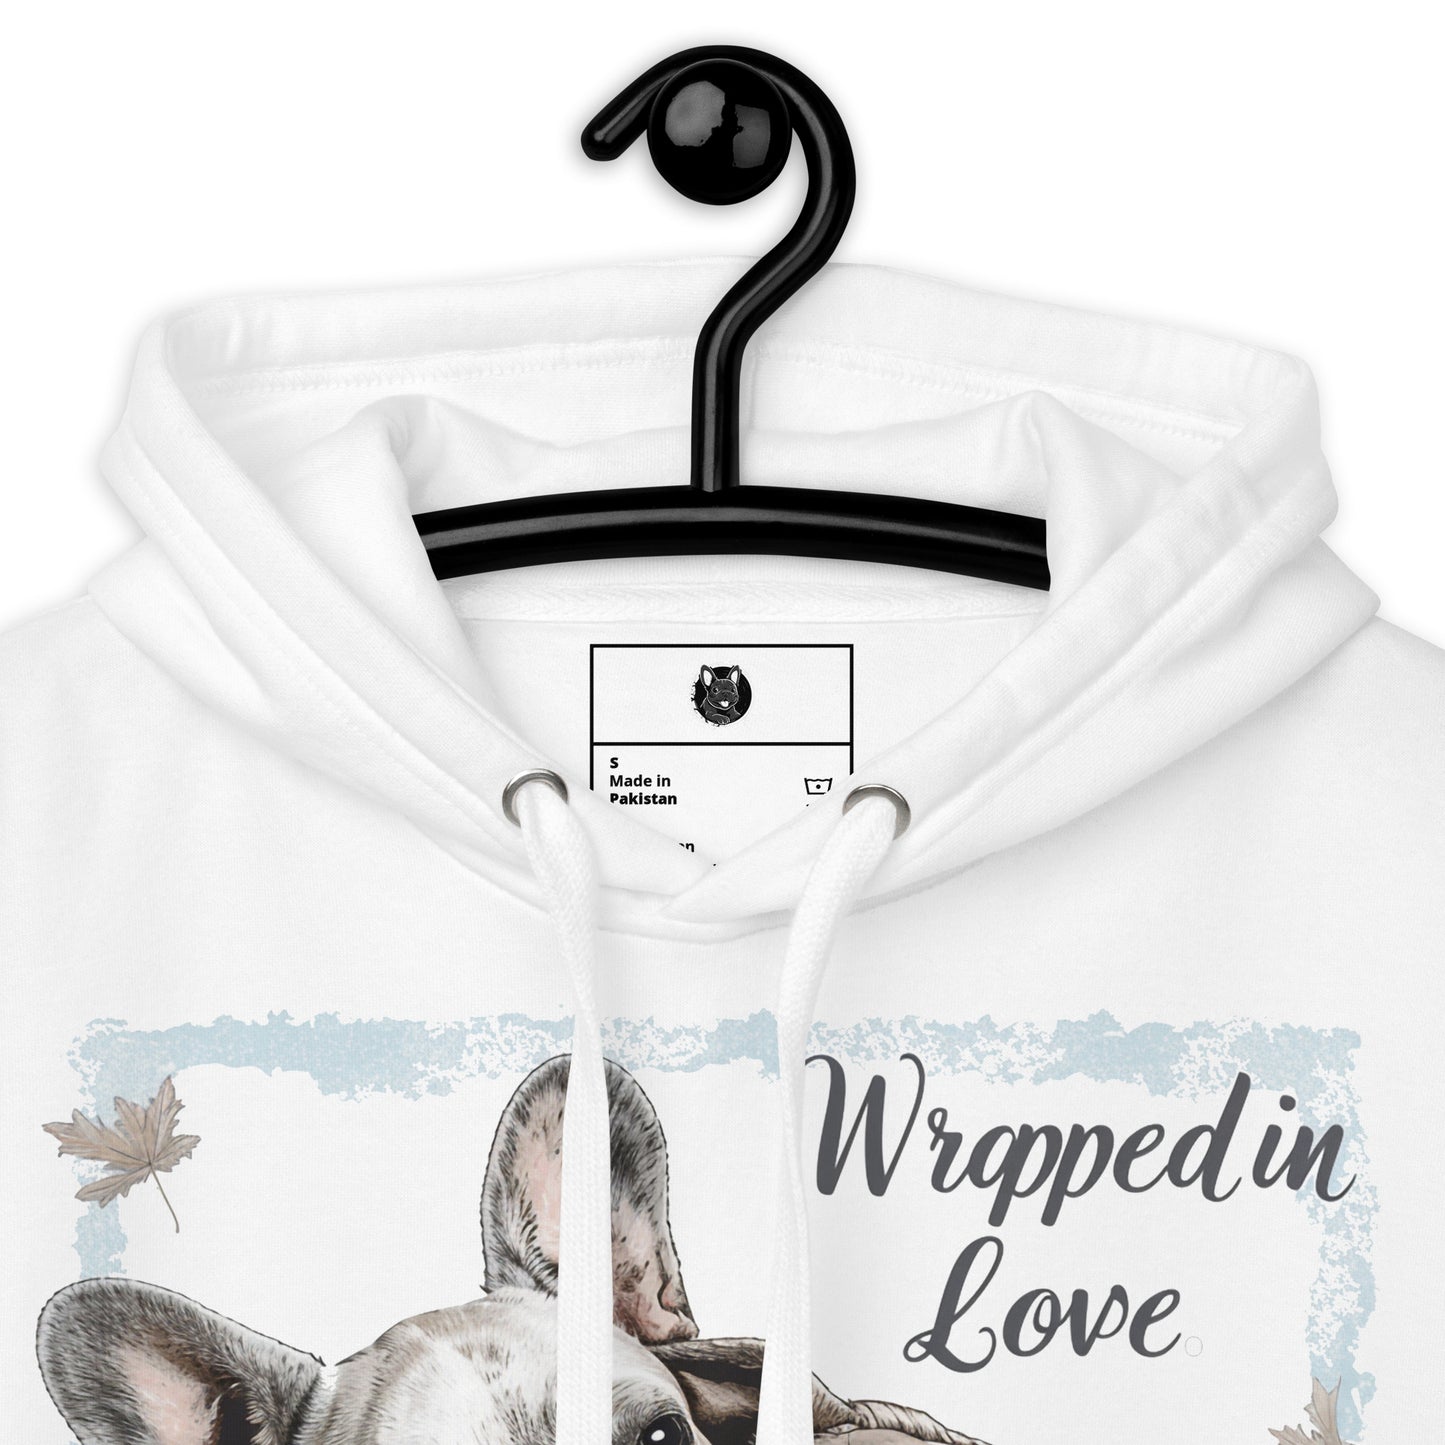 Wrapped in Love" Unisex Hoodie